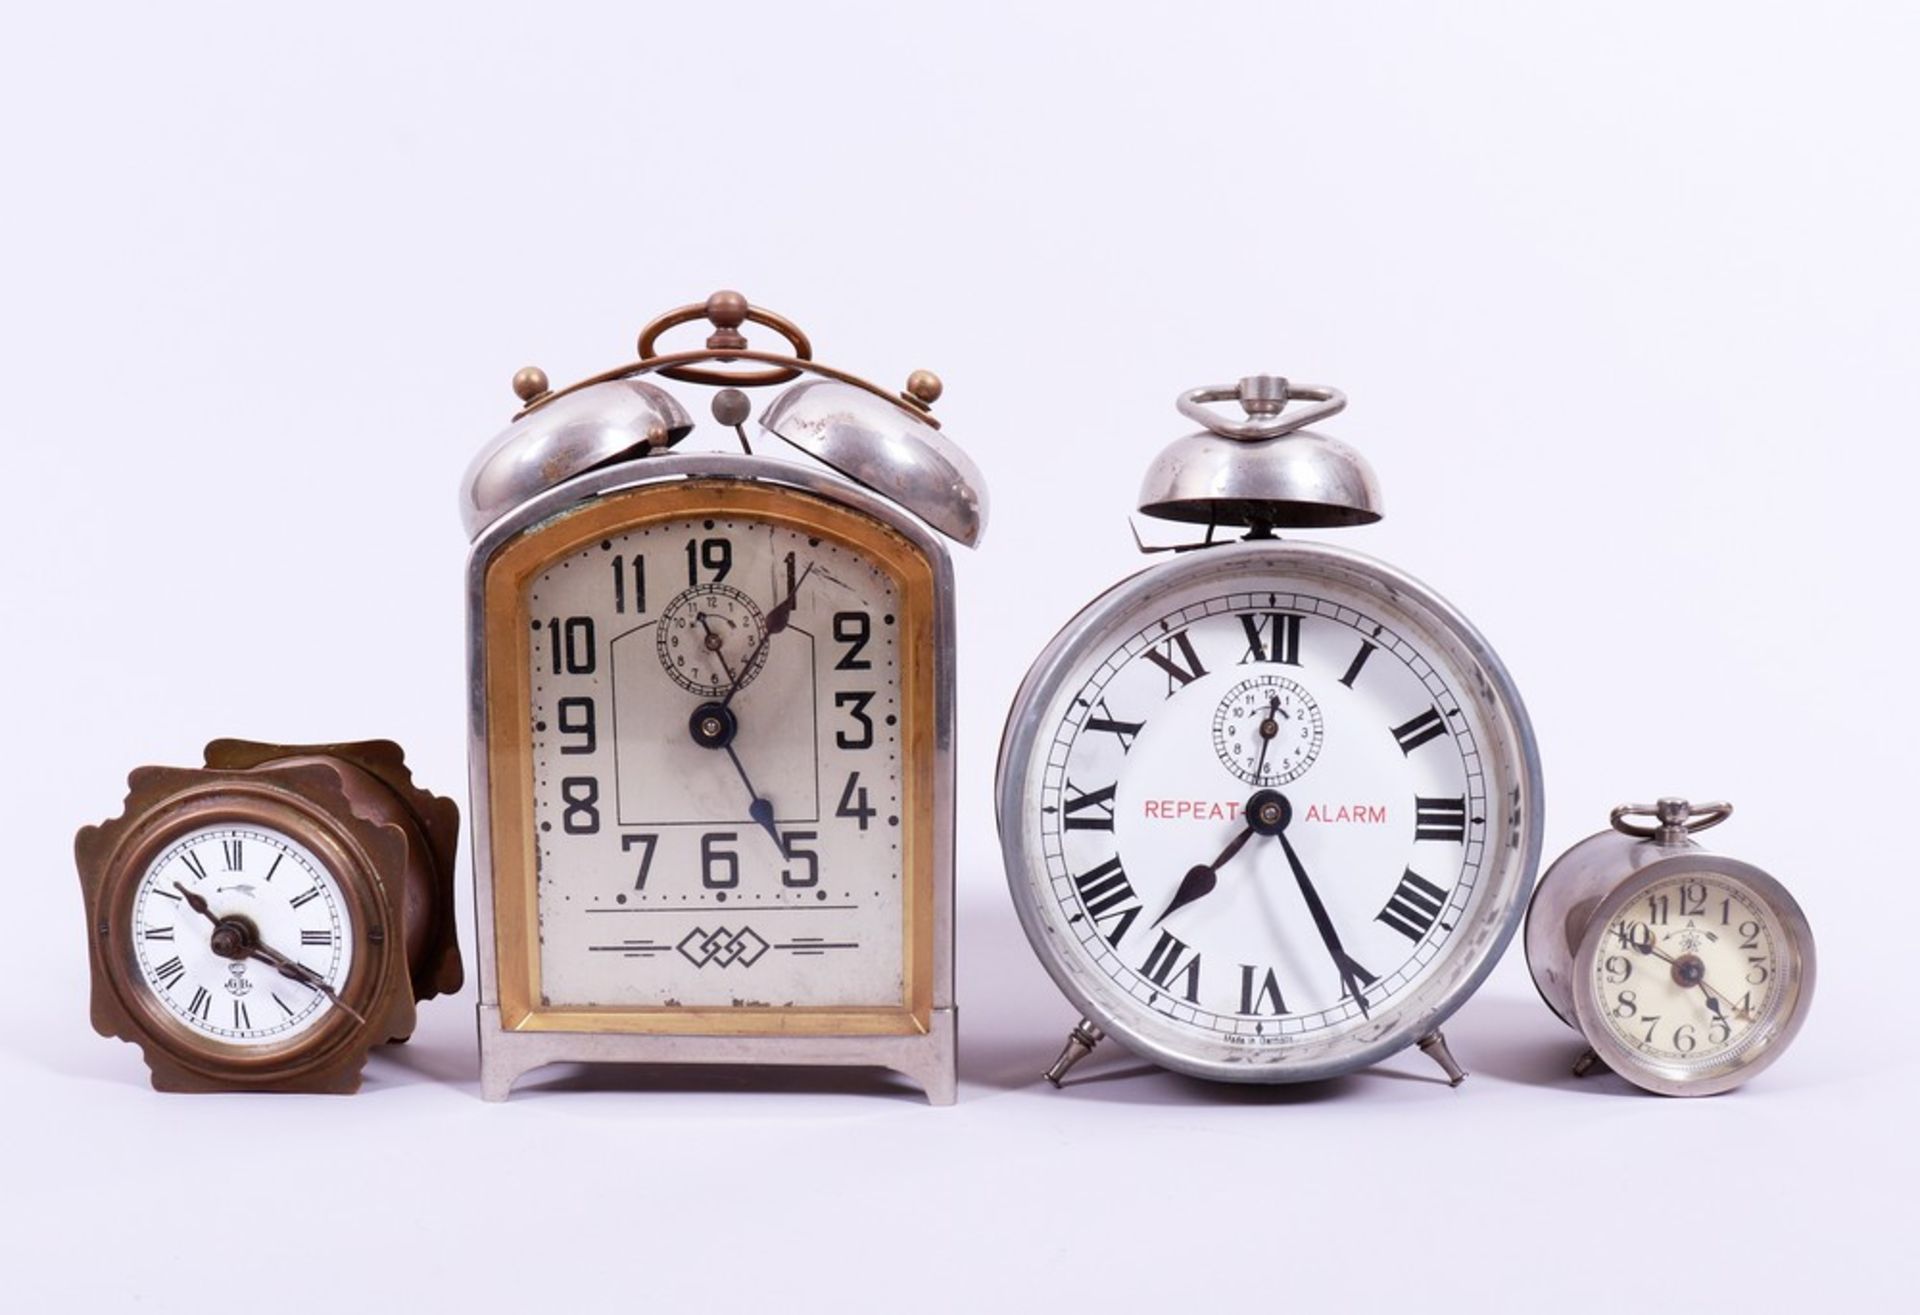 4 table alarm clocks, Gustav Becker/Junghans and others, c. 1900/20